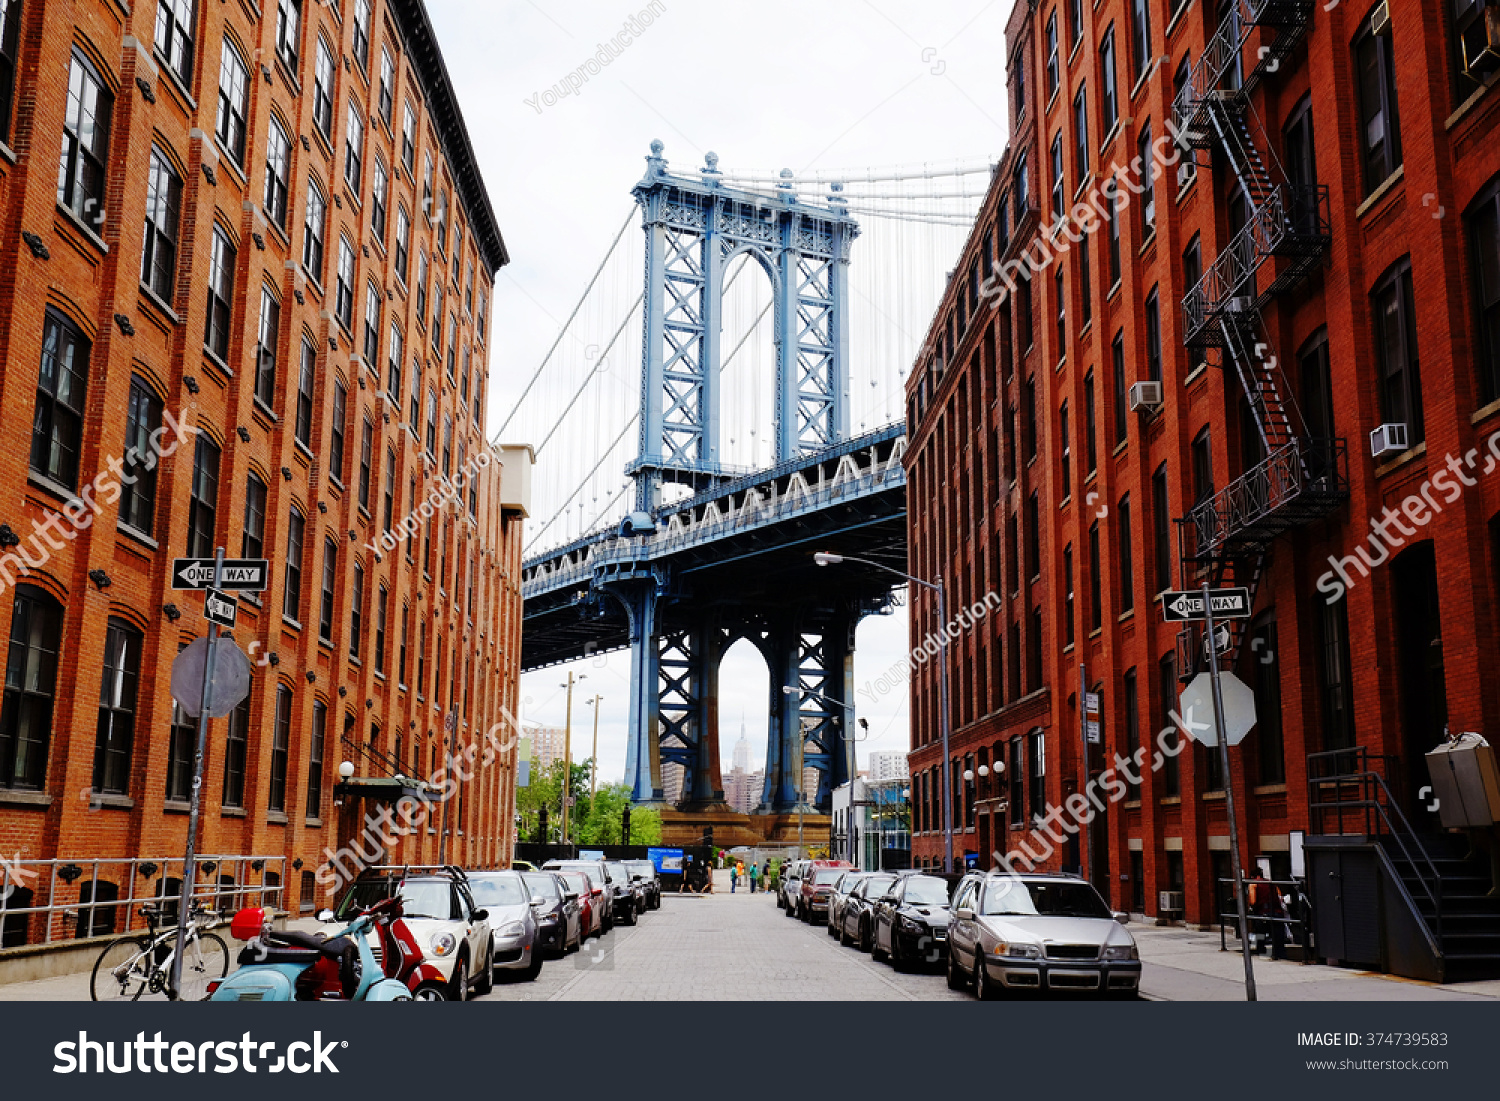 Manhattan bridge seen from a red brick buildings in Brooklyn street in perspective, New York, USA. Beautiful classic apartments in New York City. Beautiful american street. Famous view. #374739583